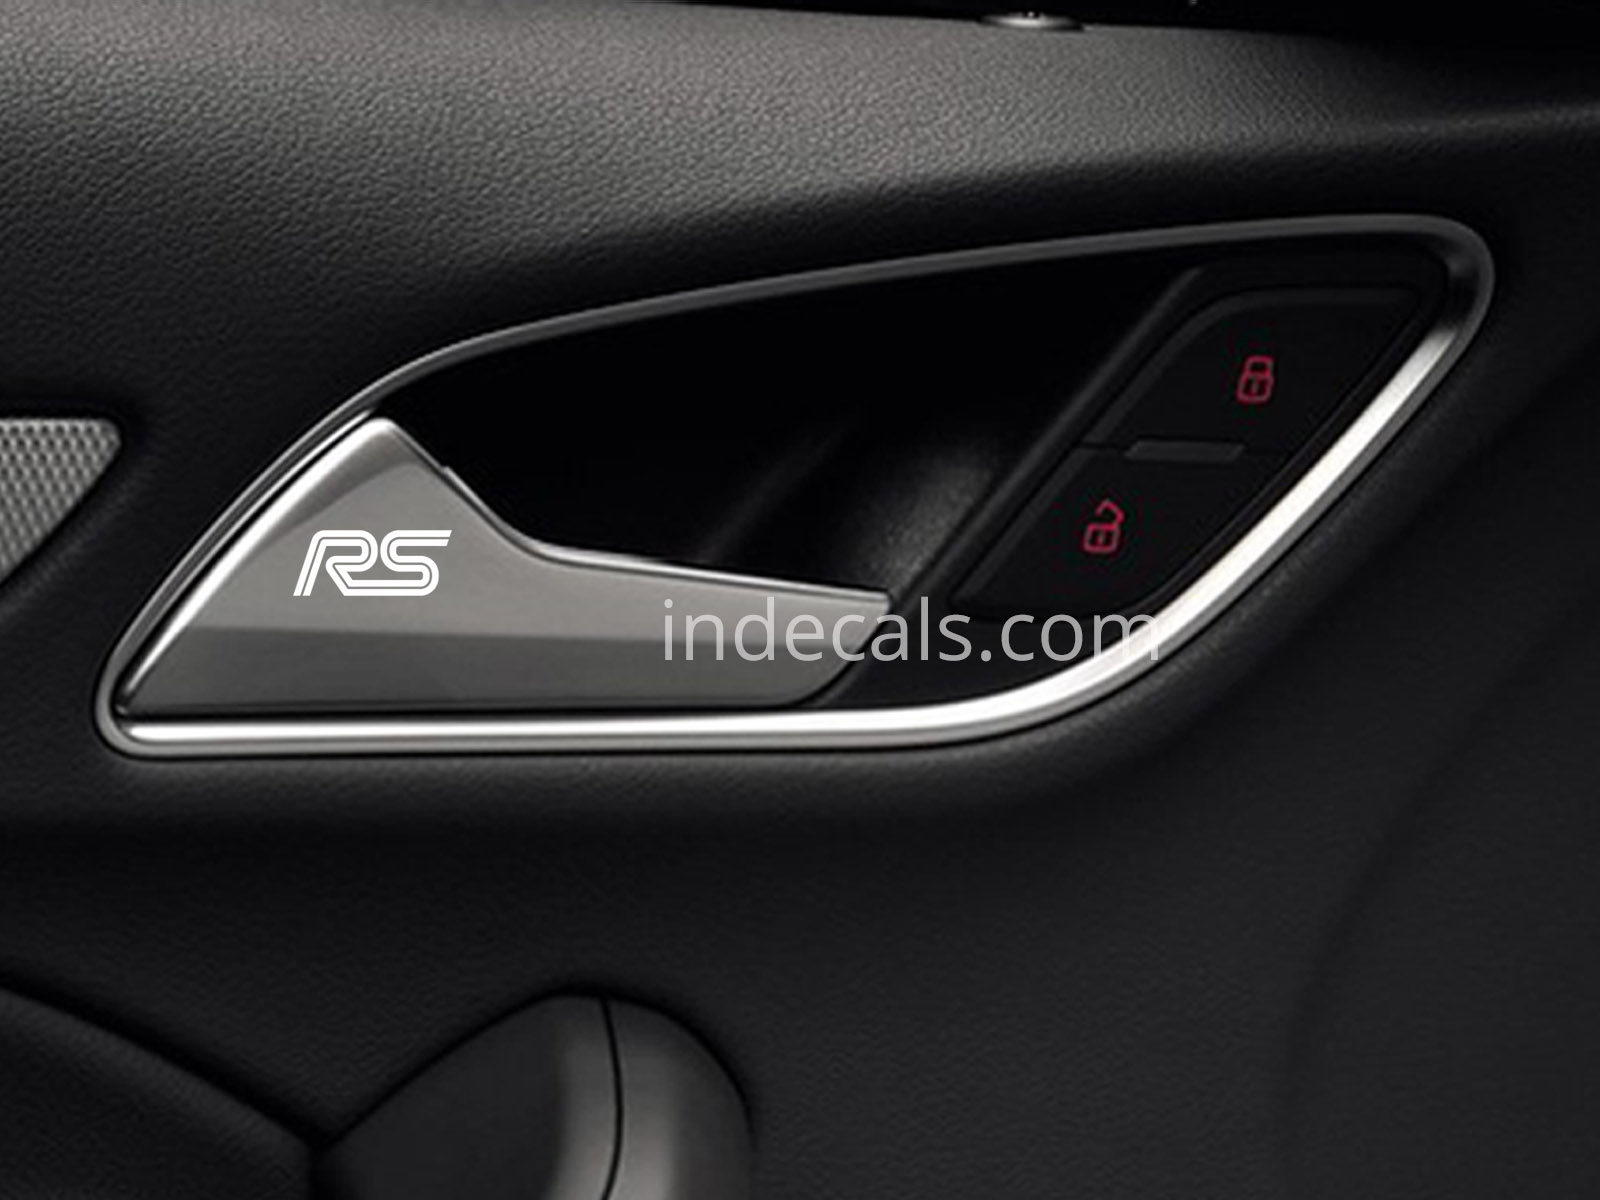 6 x Ford RS Stickers for Door Handle - White